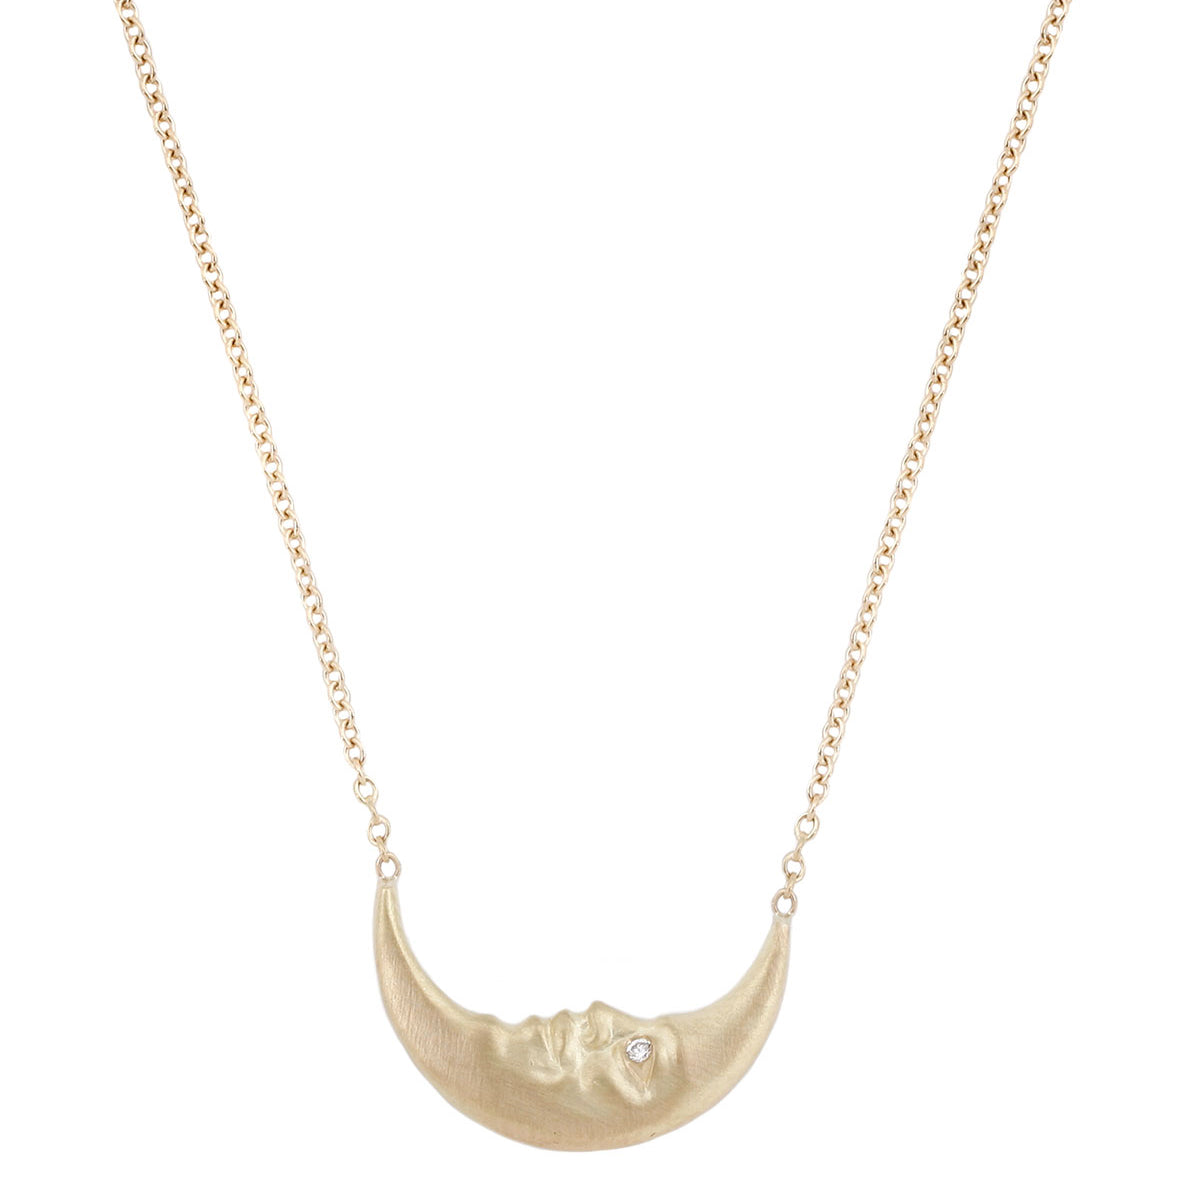 Anthony Lent gold crescent moon necklace